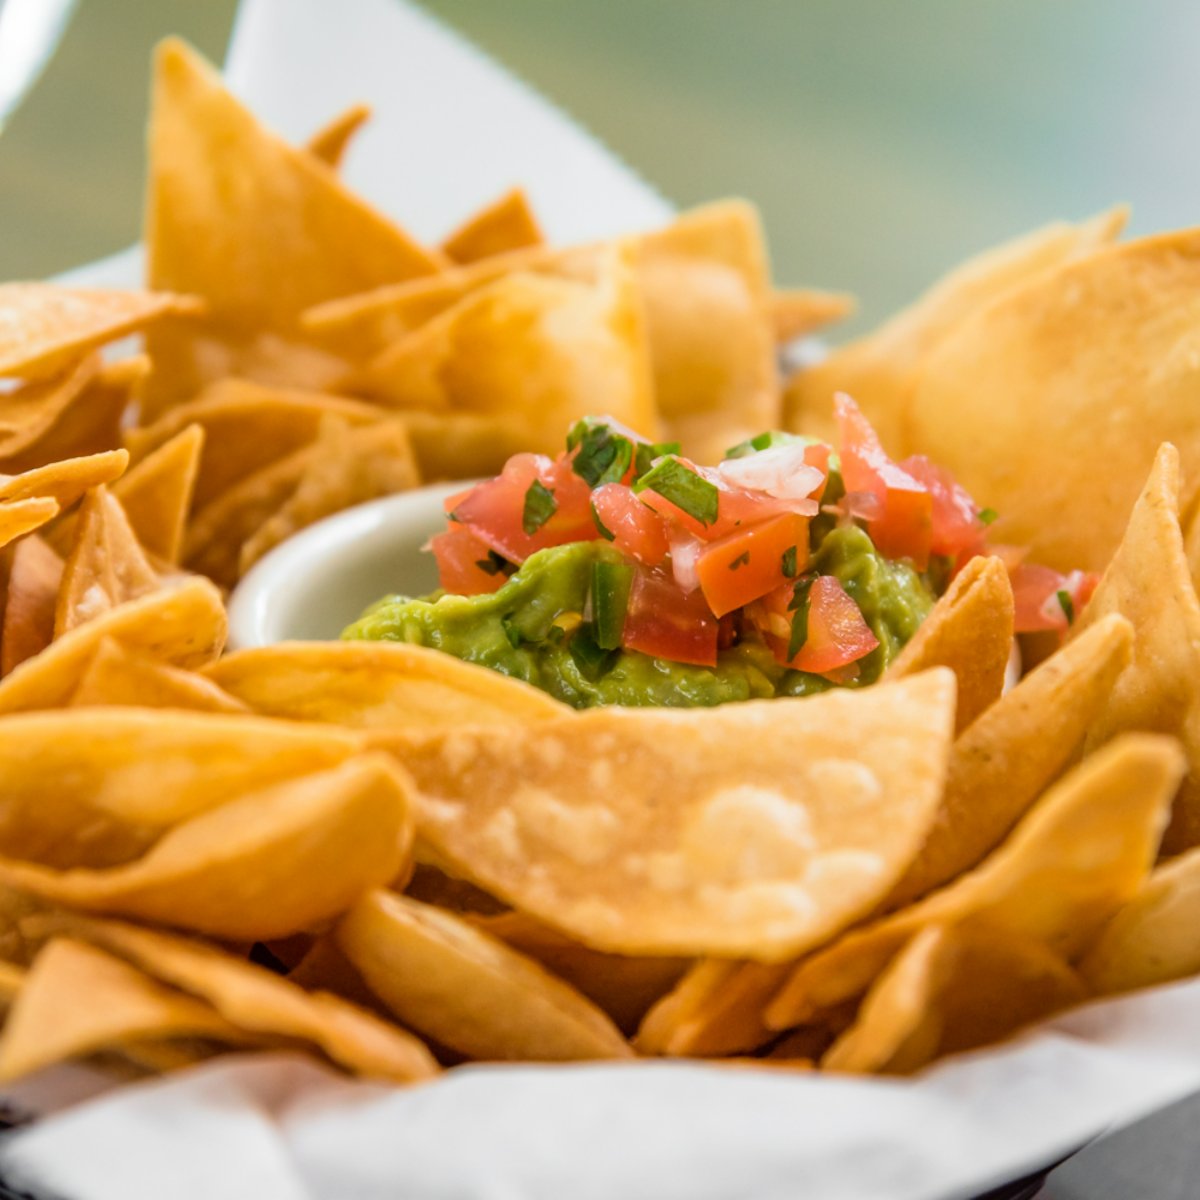 You guac our world, Moorestown, and there's nothing else we'd rather do than share our passion for authentic Mexican cuisine with you.